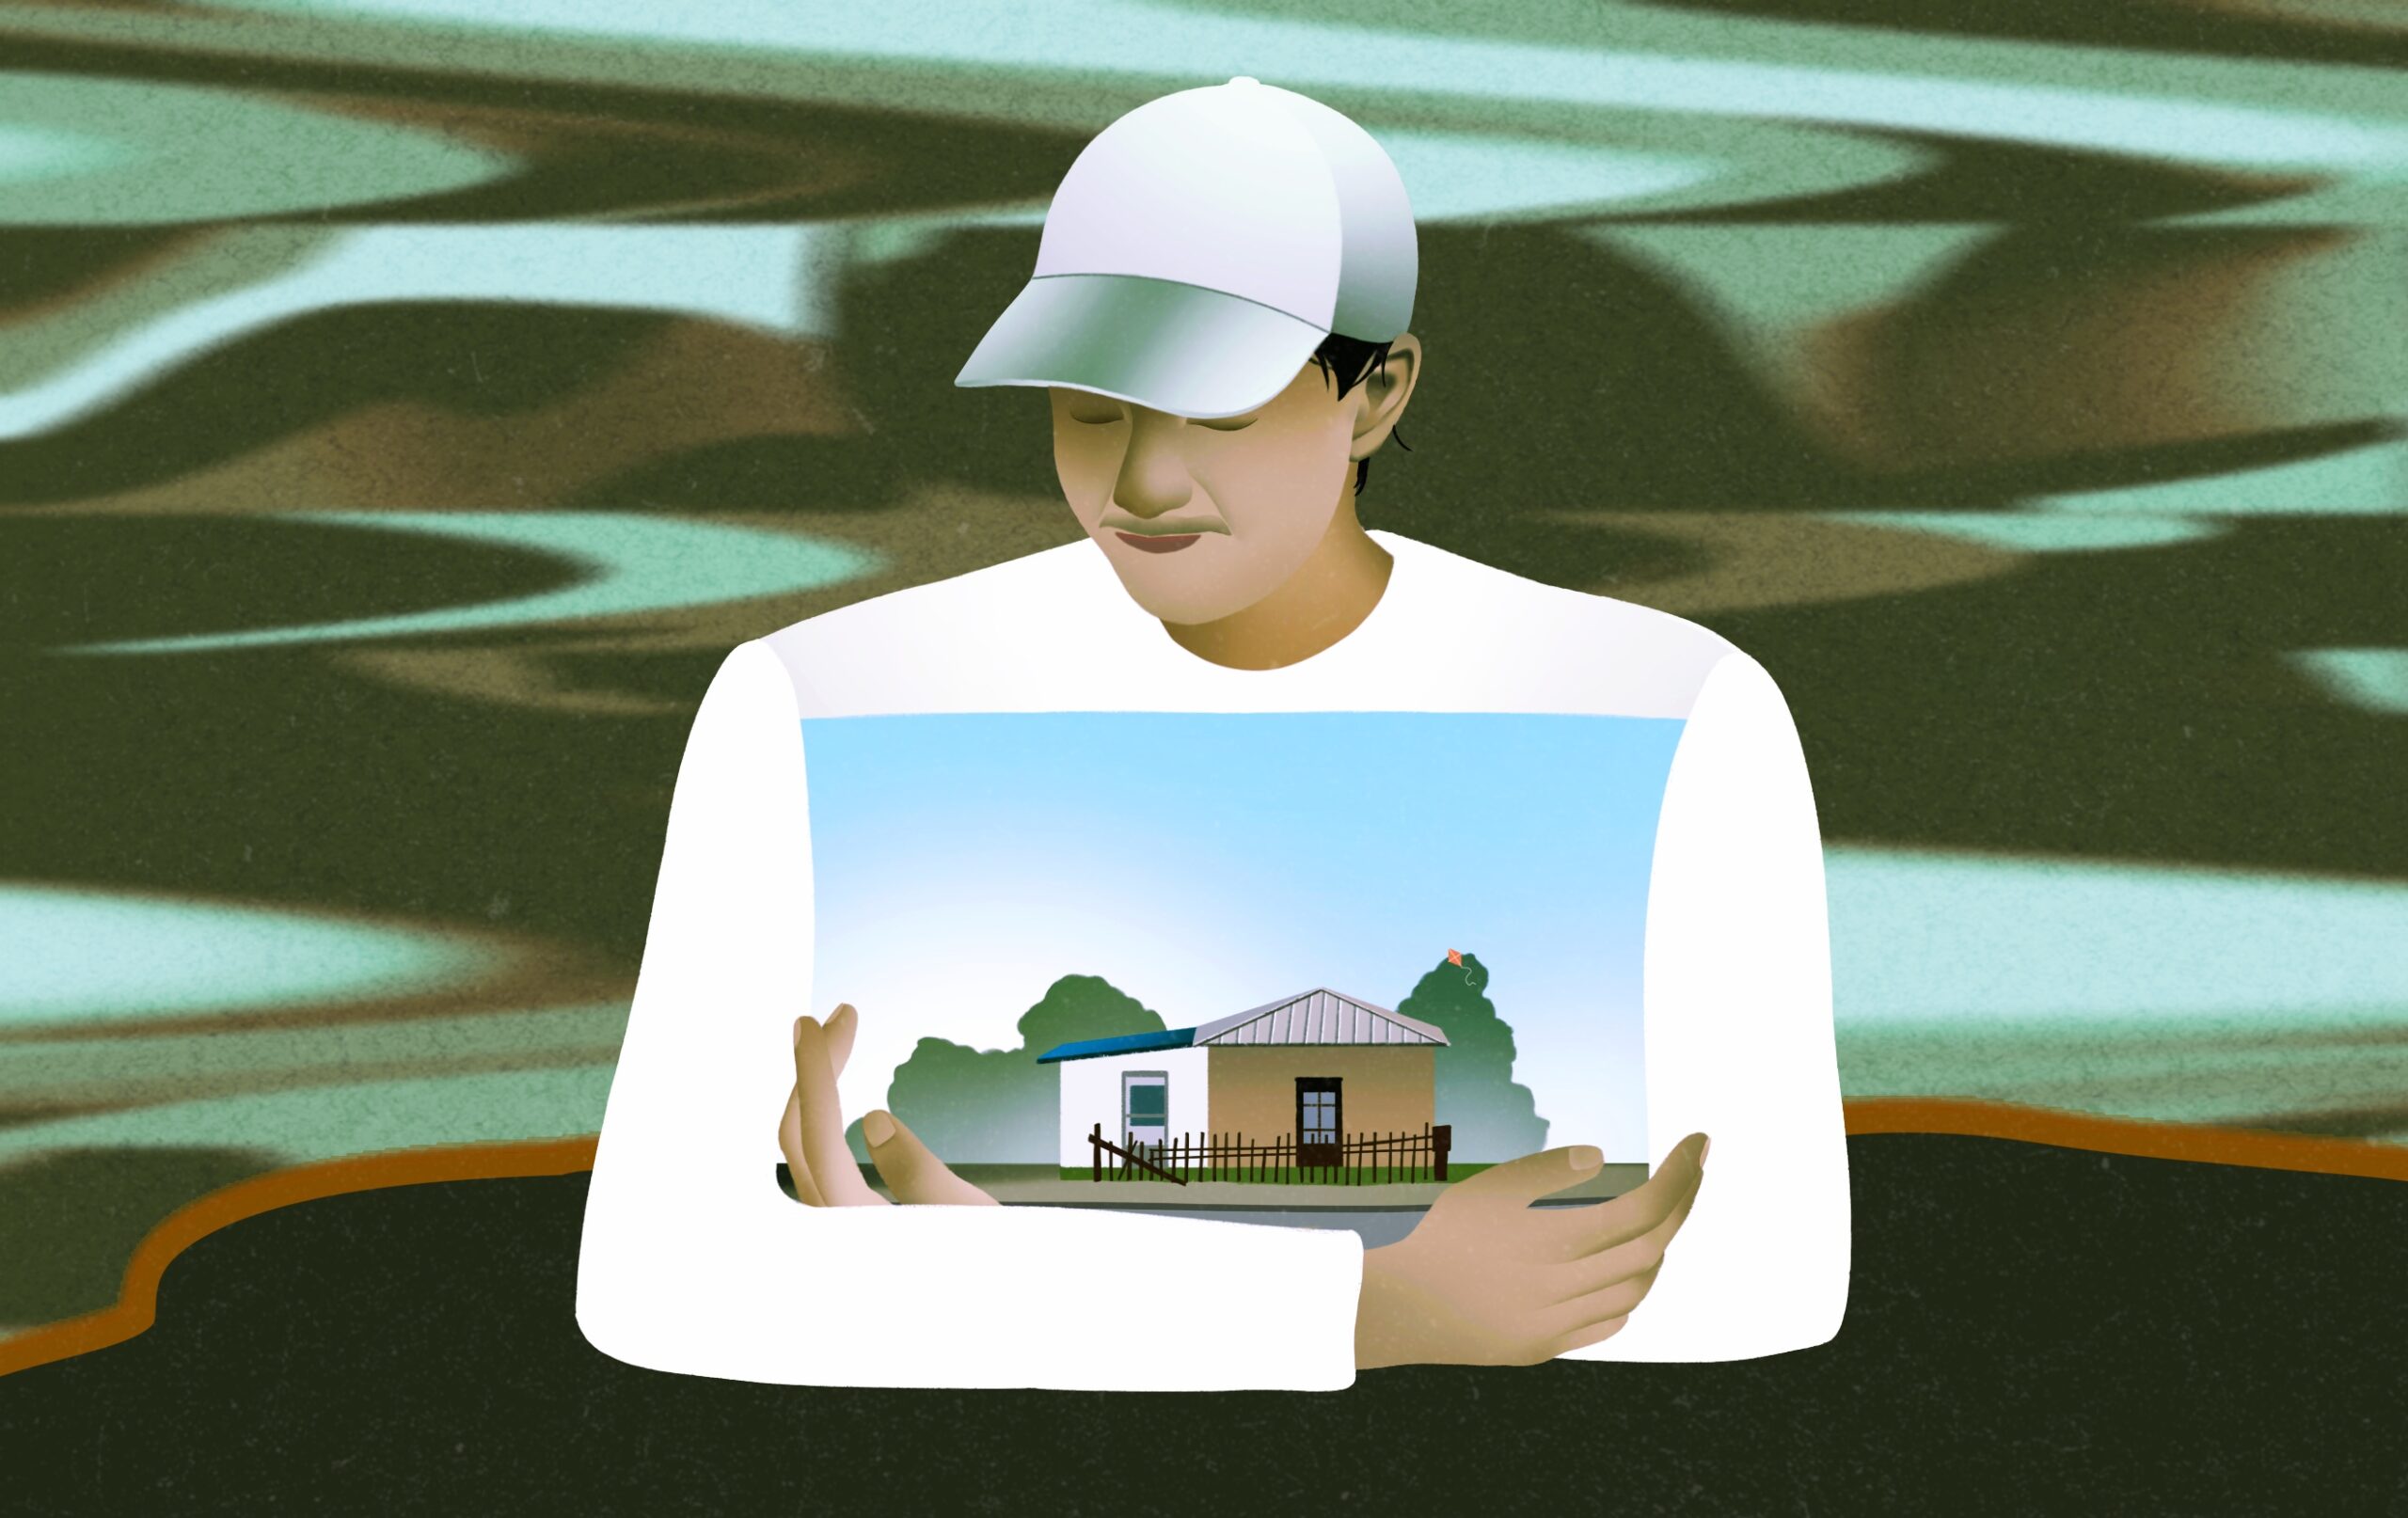 Illustration of a man holding a tranquil image of the house to his chest amidst the whirlwind of uncertainty